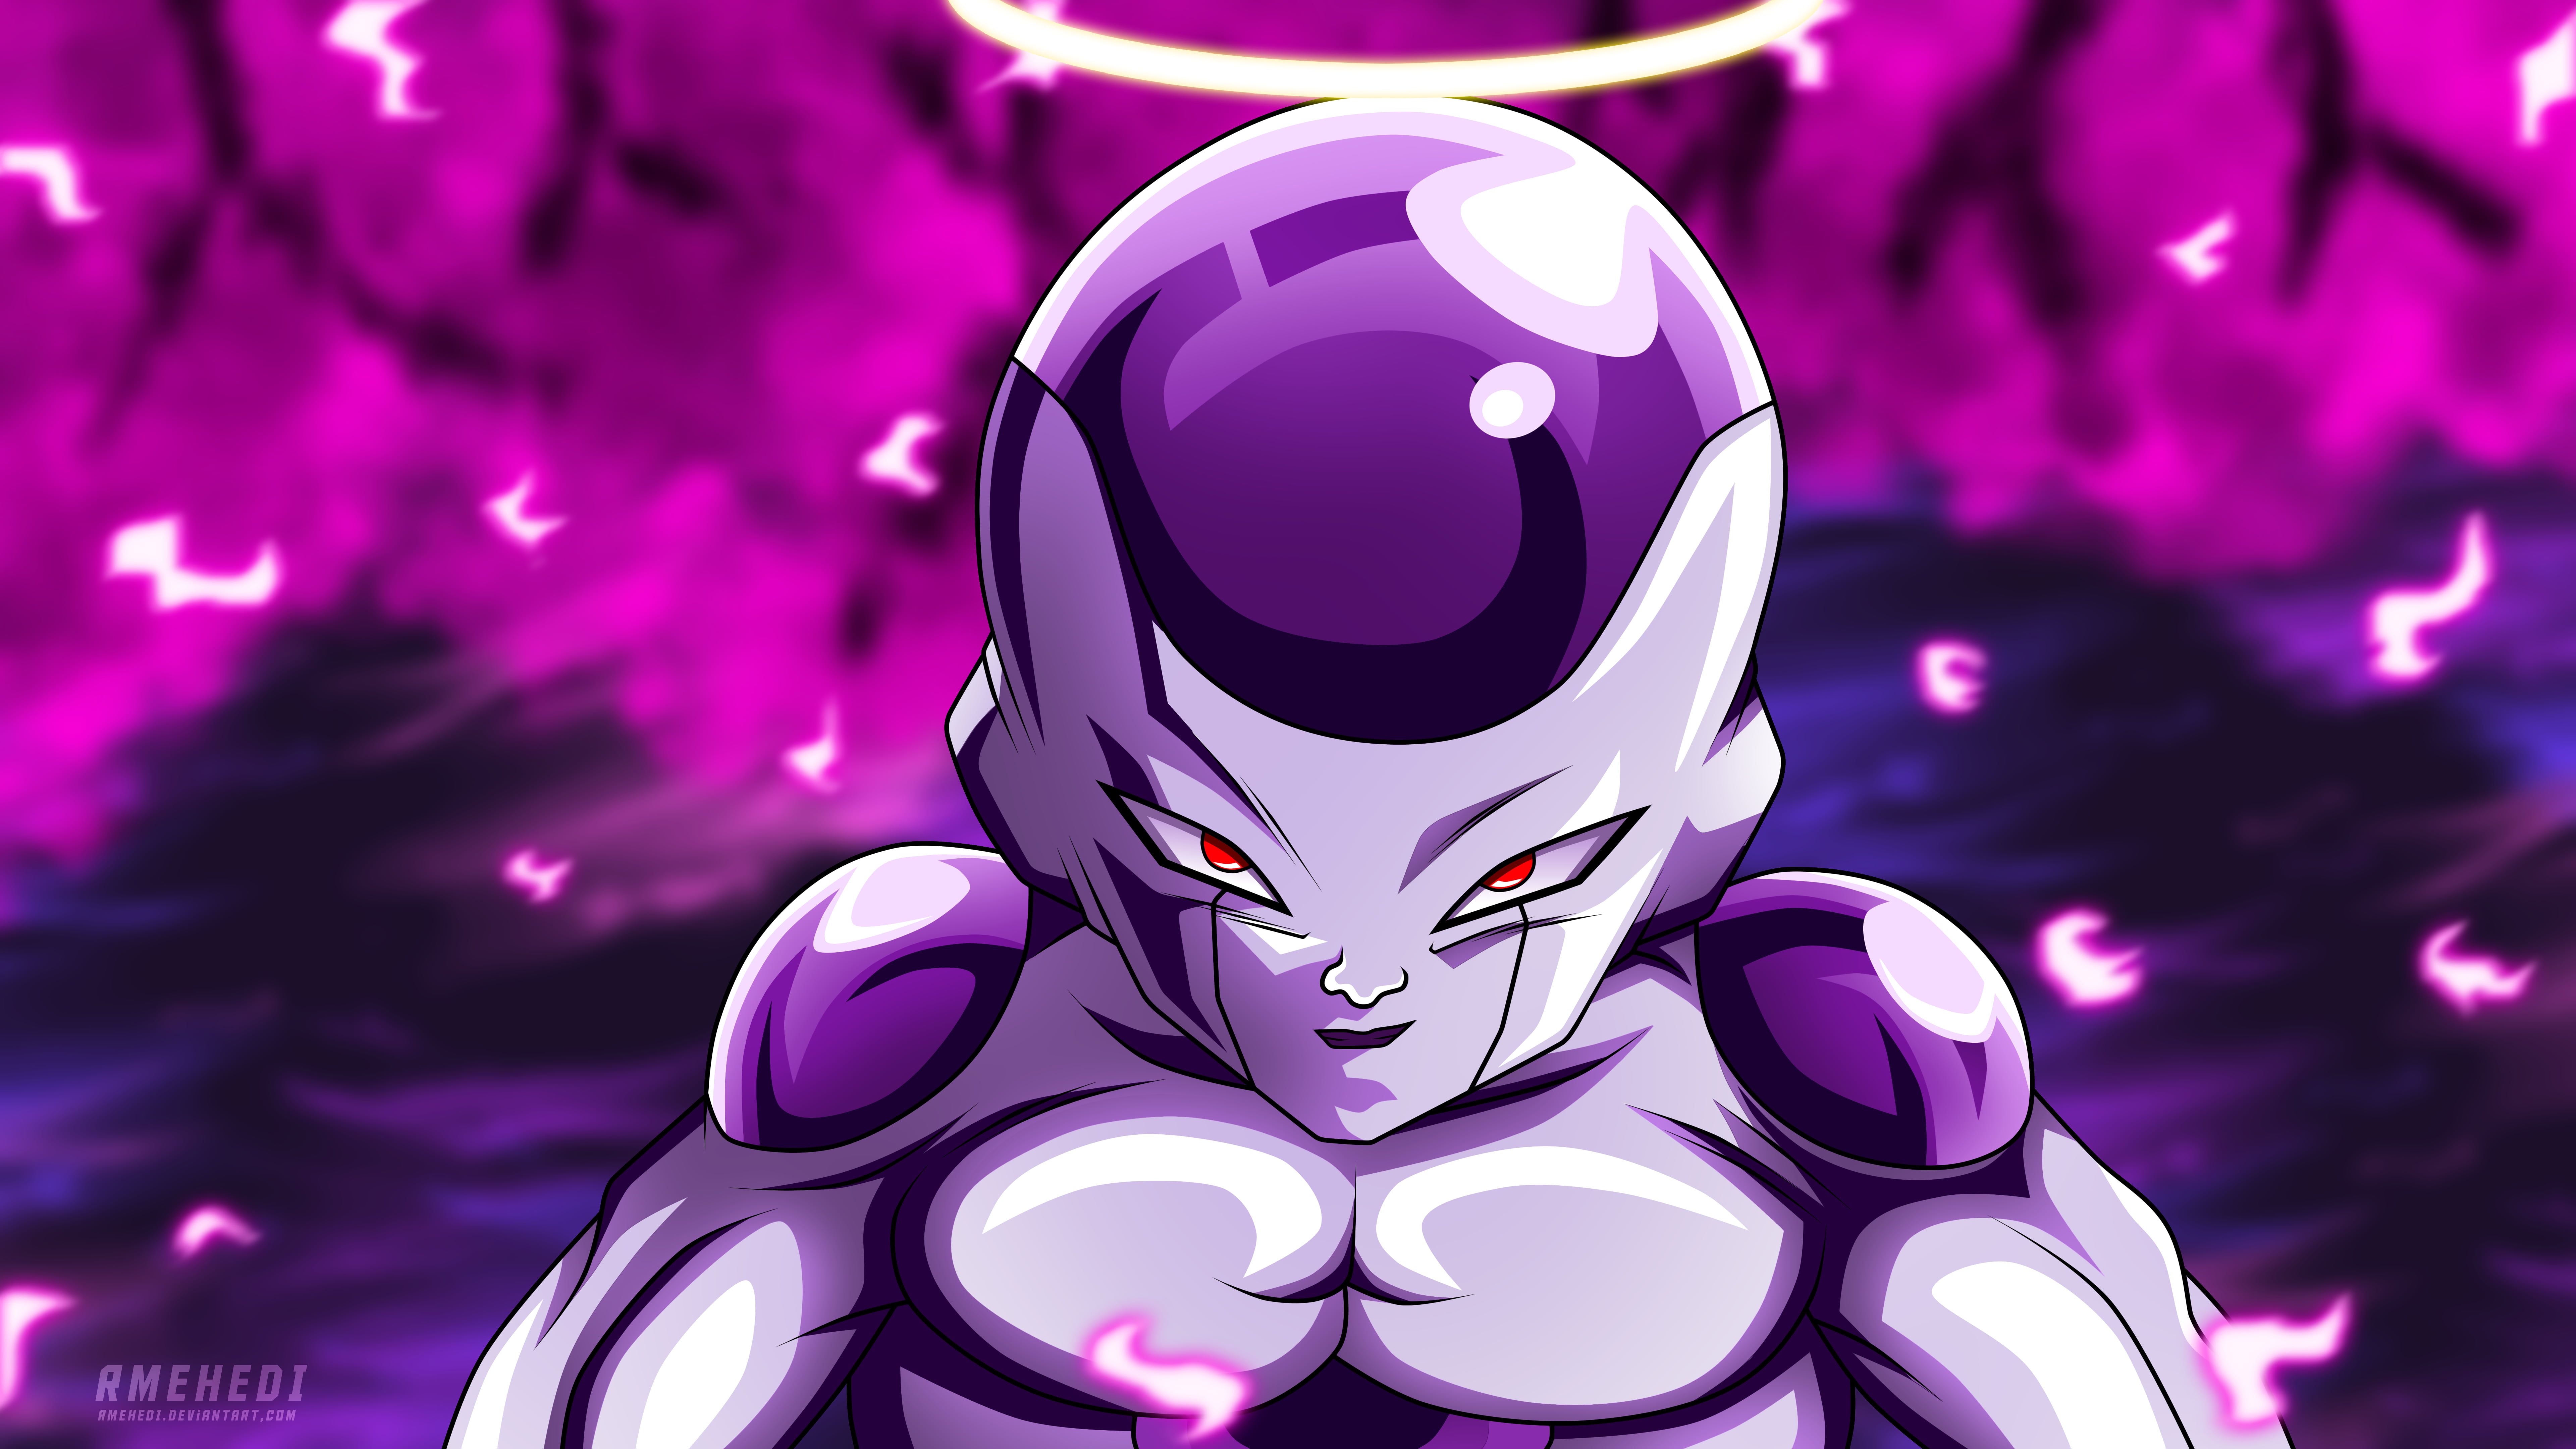 Download Golden Frieza wallpaper by LordFrieza  17  Free on ZEDGE now  Browse millions of pop  Dragon ball painting Dragon ball super Anime  dragon ball goku